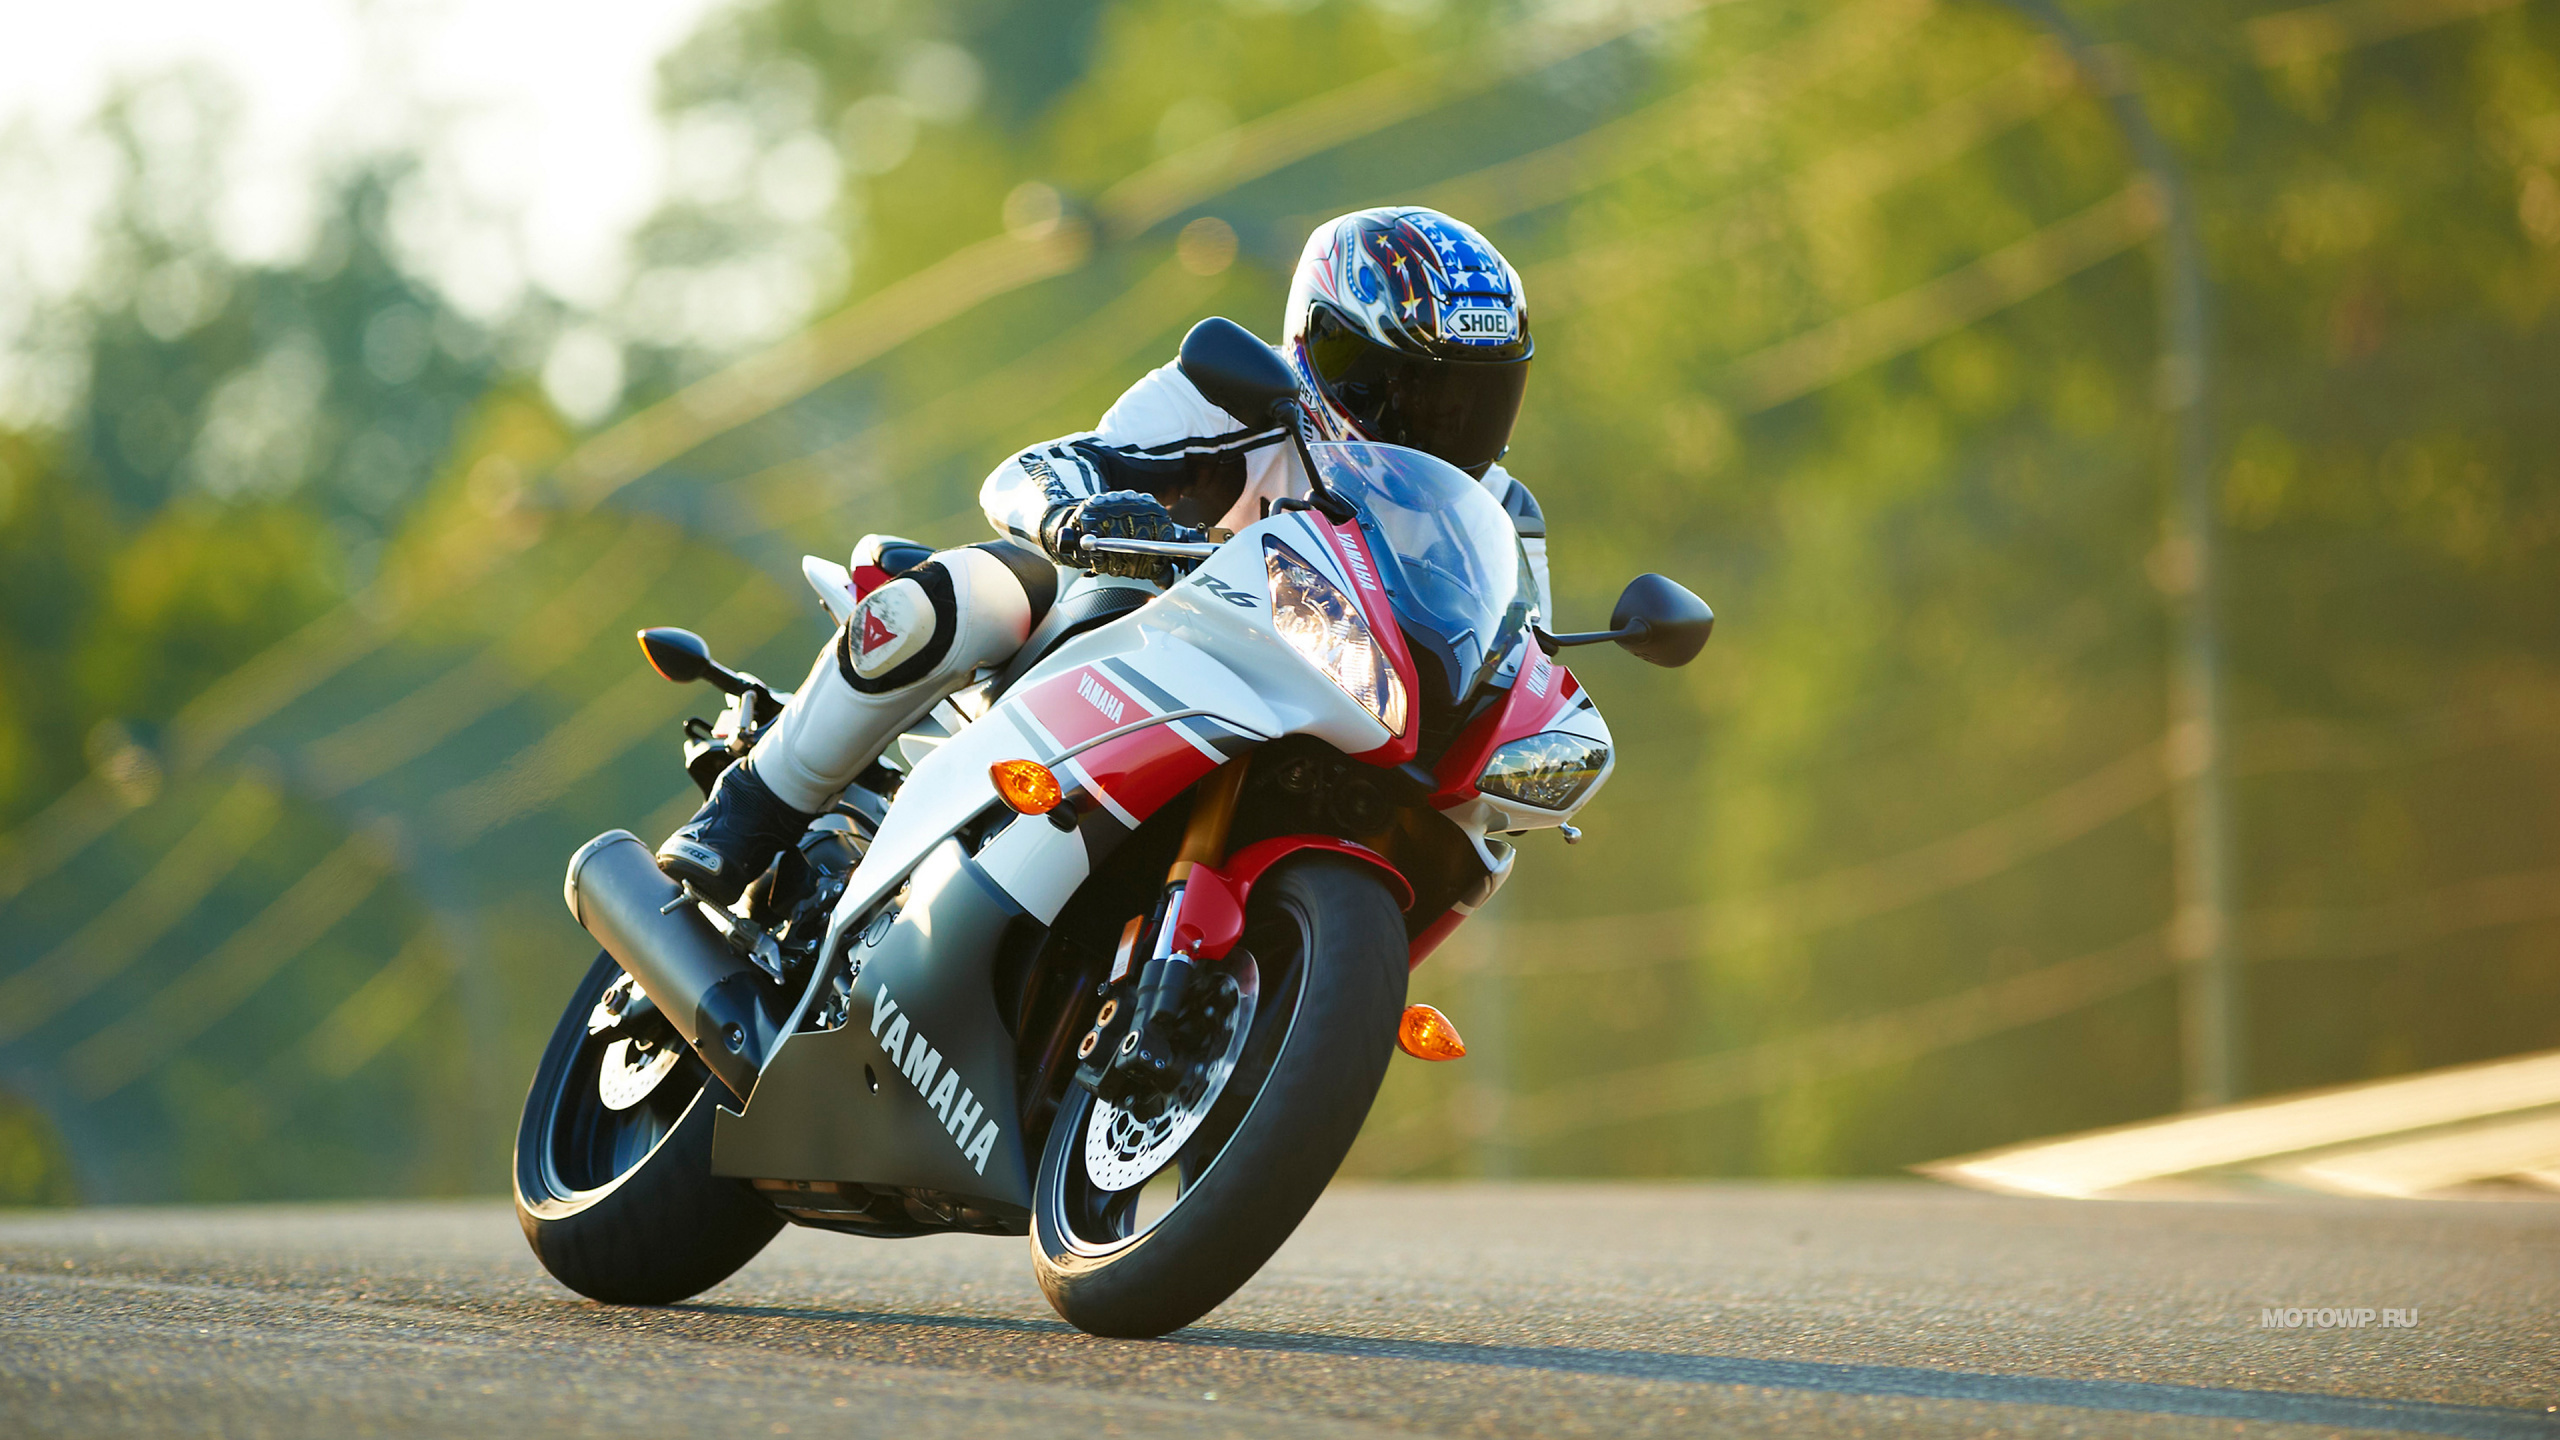 Man in Red and White Motorcycle Suit Riding on Motorcycle. Wallpaper in 2560x1440 Resolution